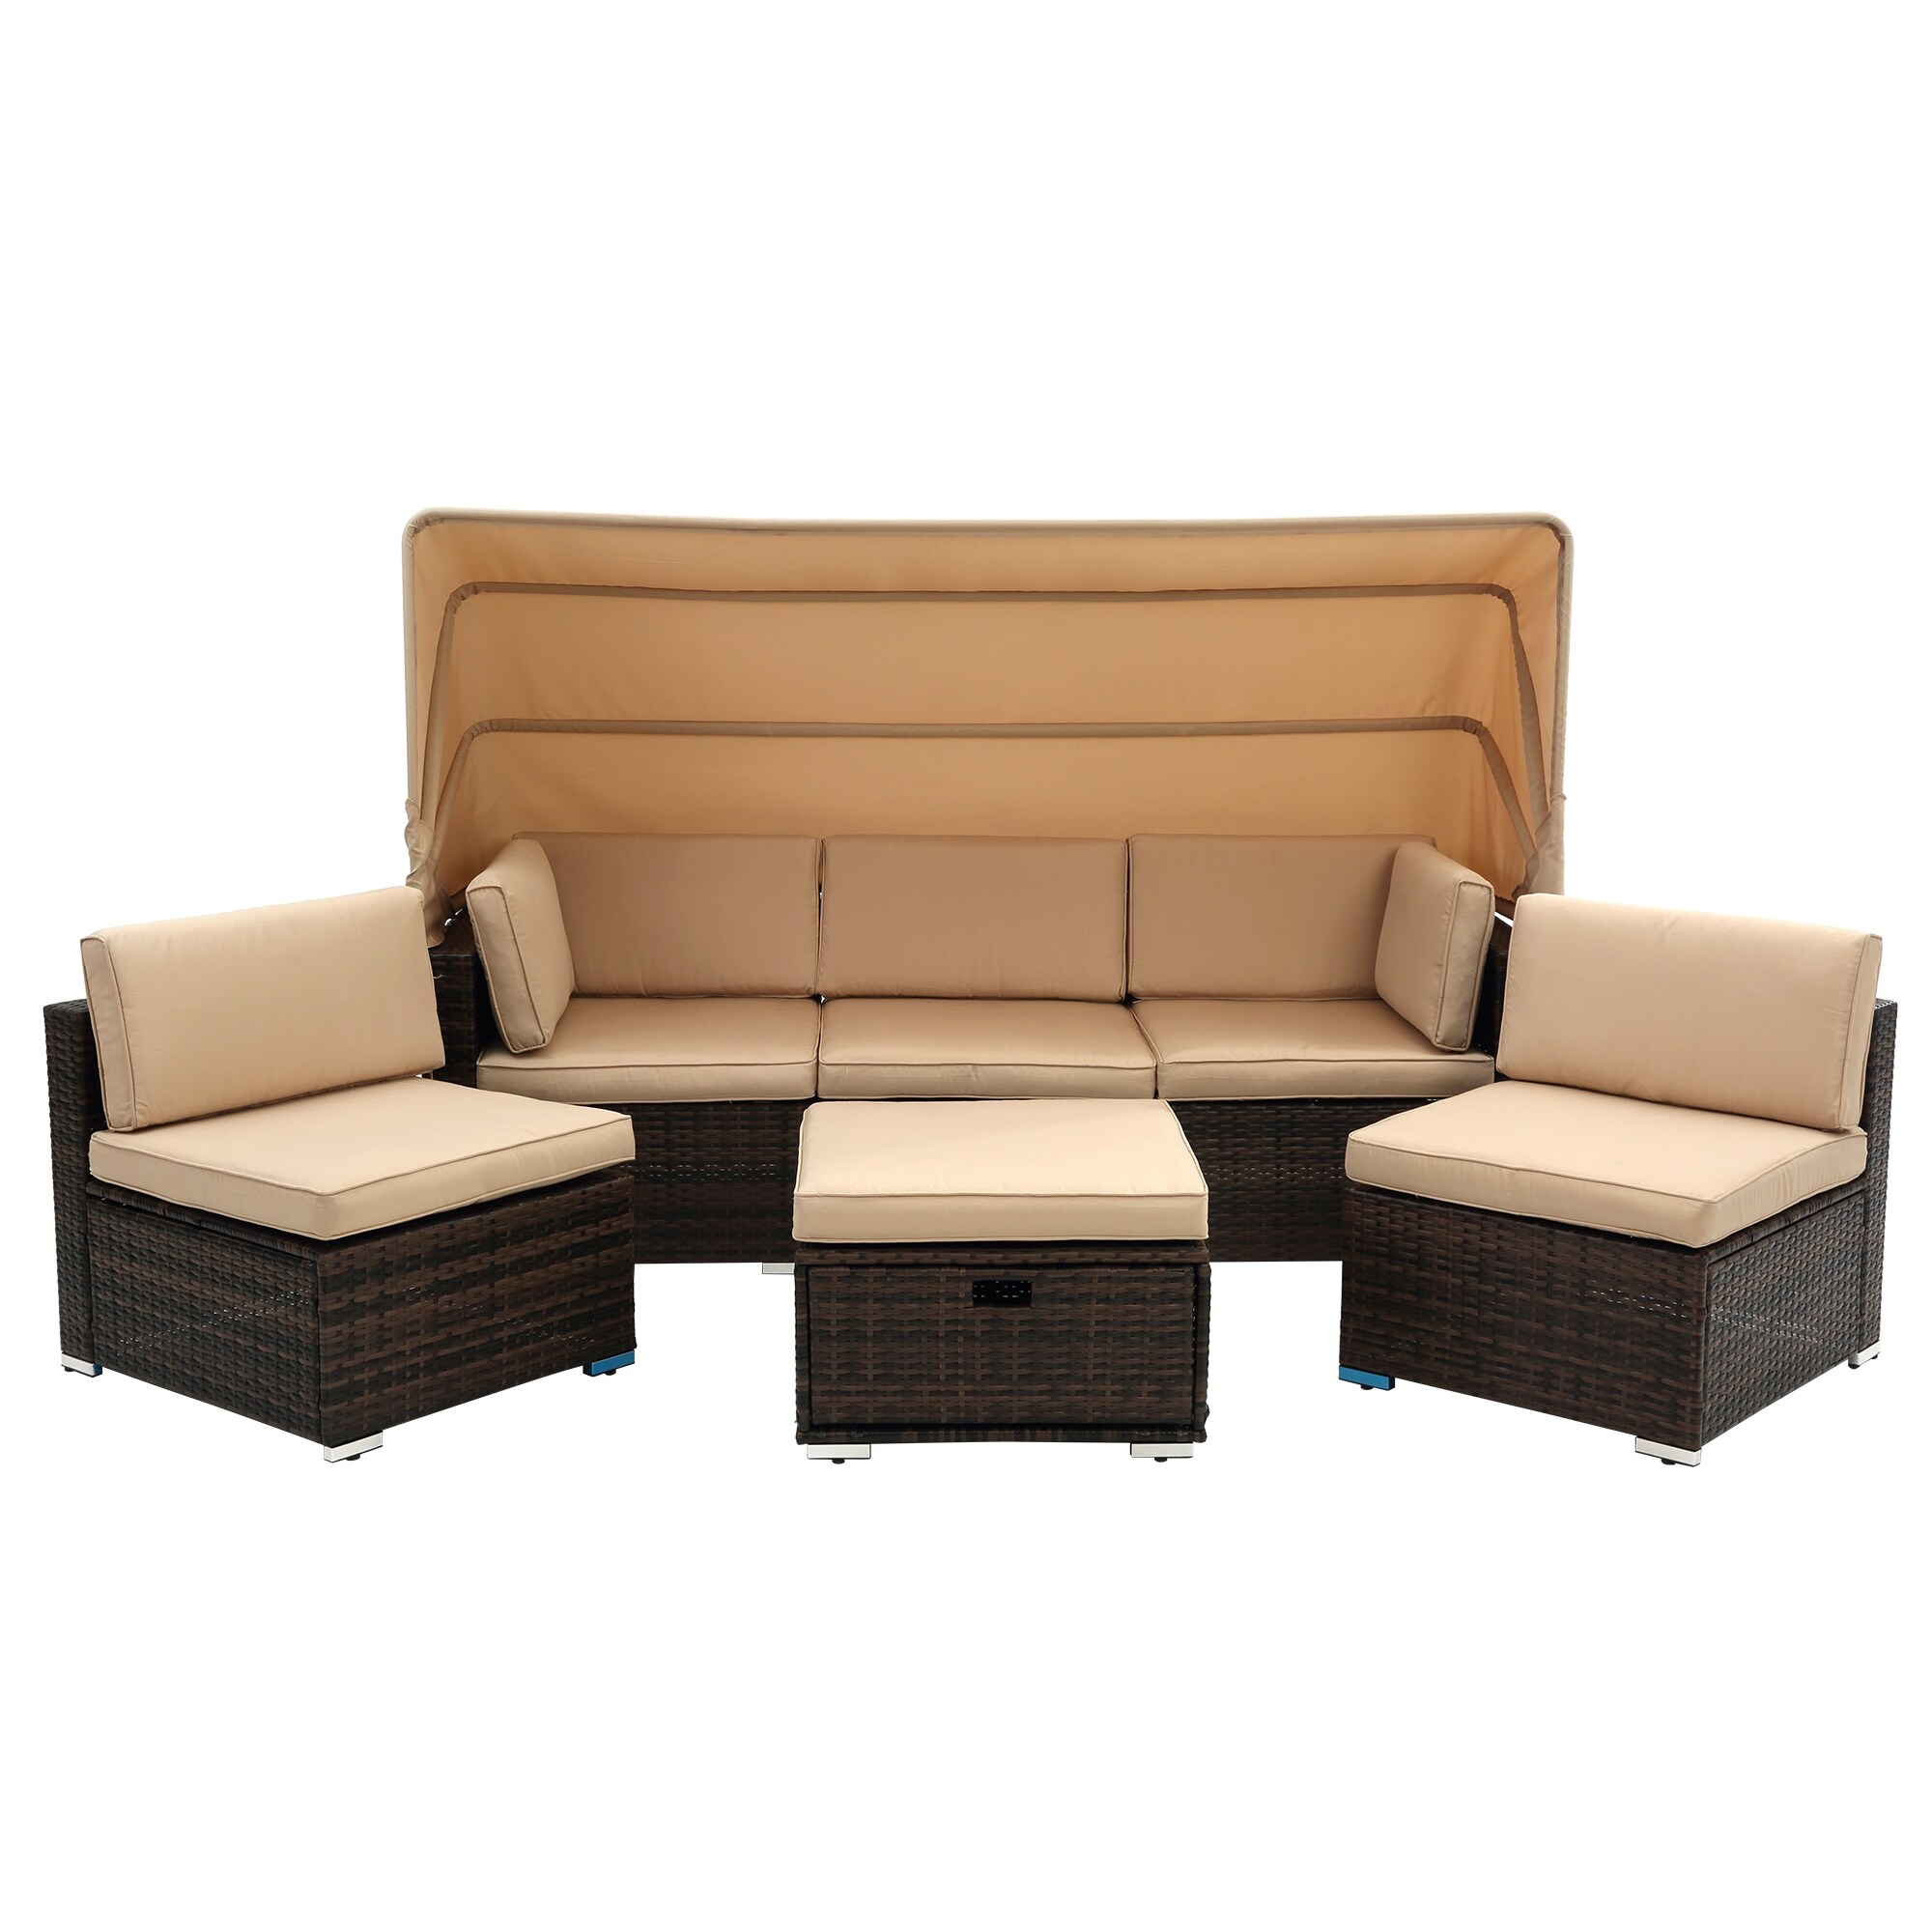 Modern Outdoor Sunbathing Rattan Sofa Sets With Roof